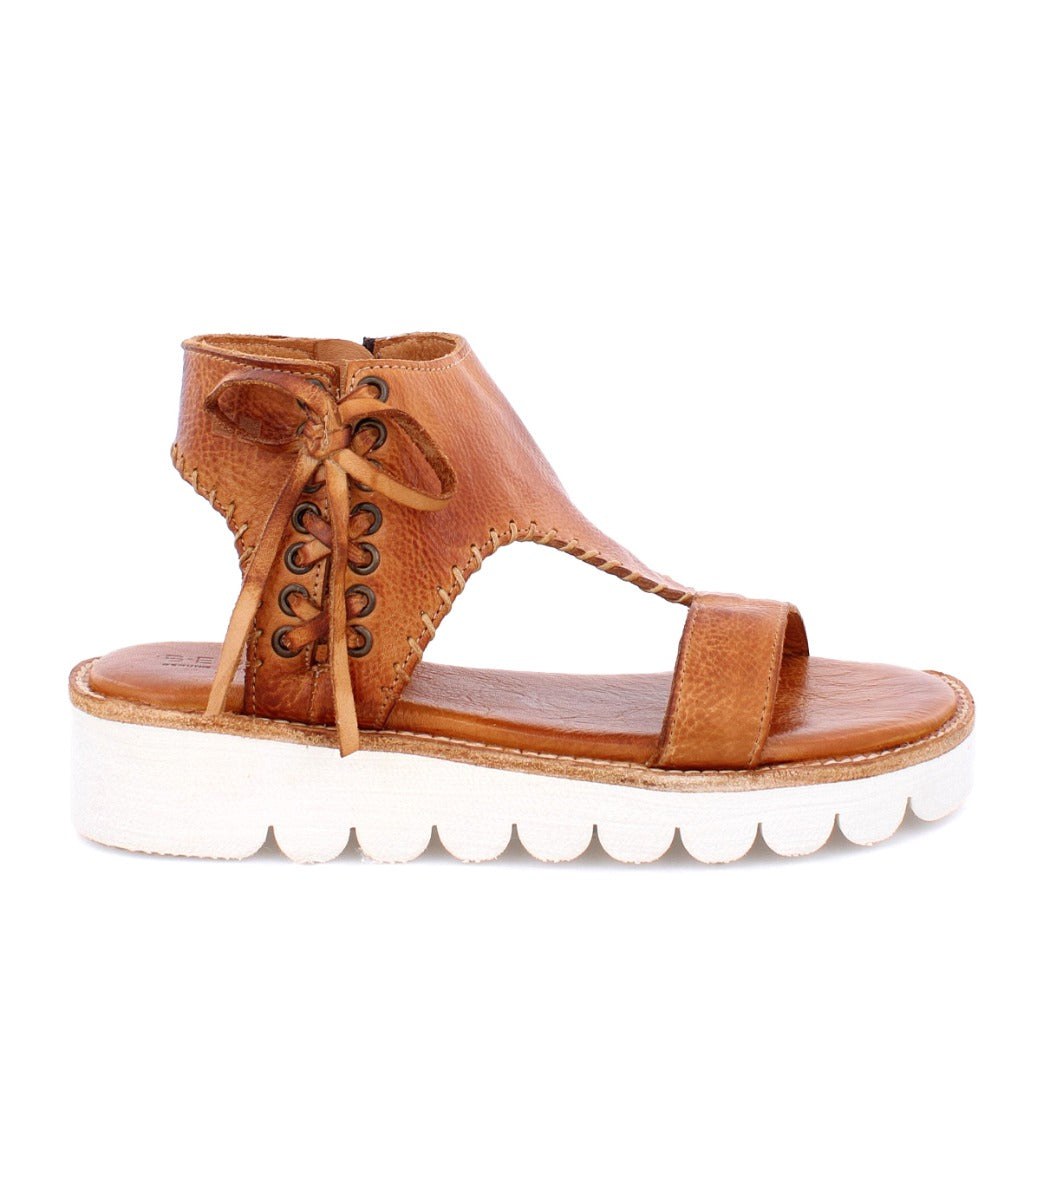 A women's Zoe II tan leather sandal with lace up detail by Bed Stu.